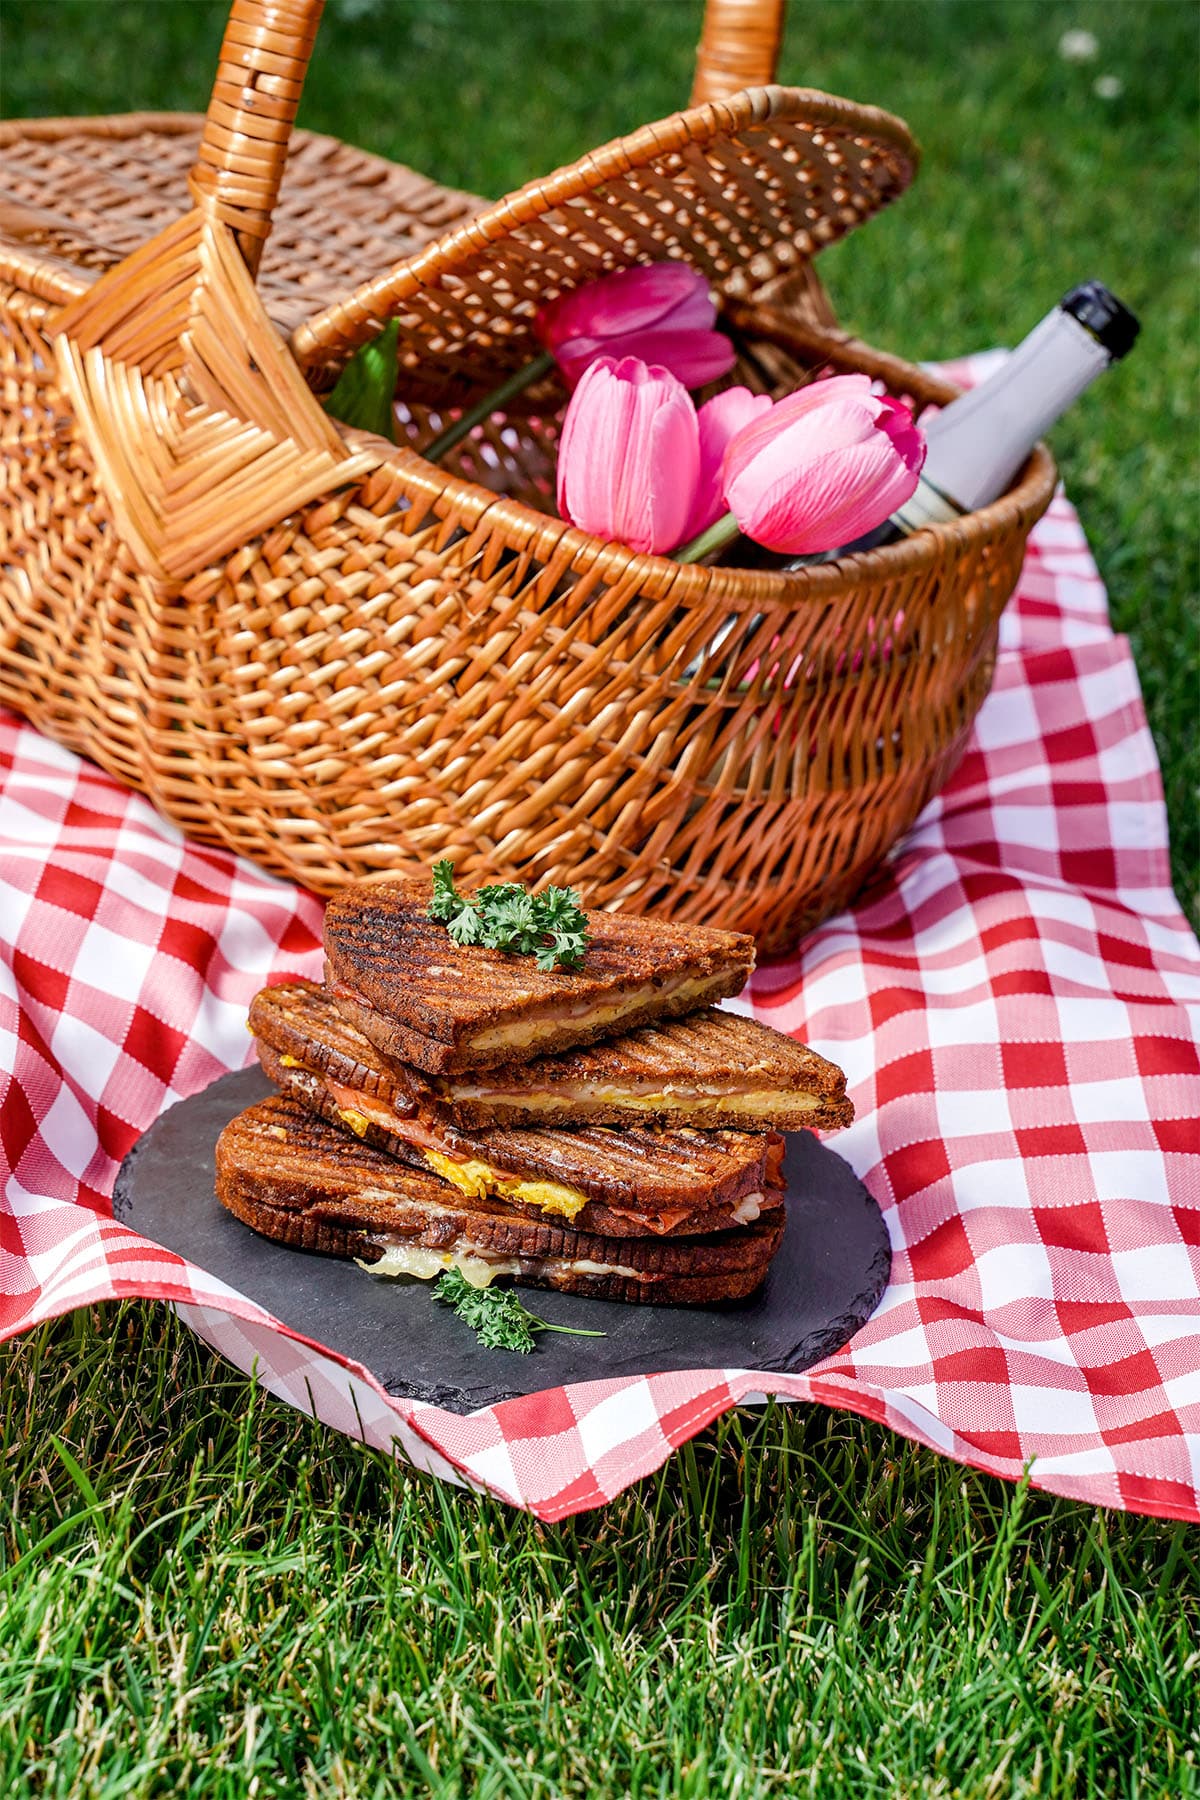 Bacon And Eggs Panini on a plate at a picnic